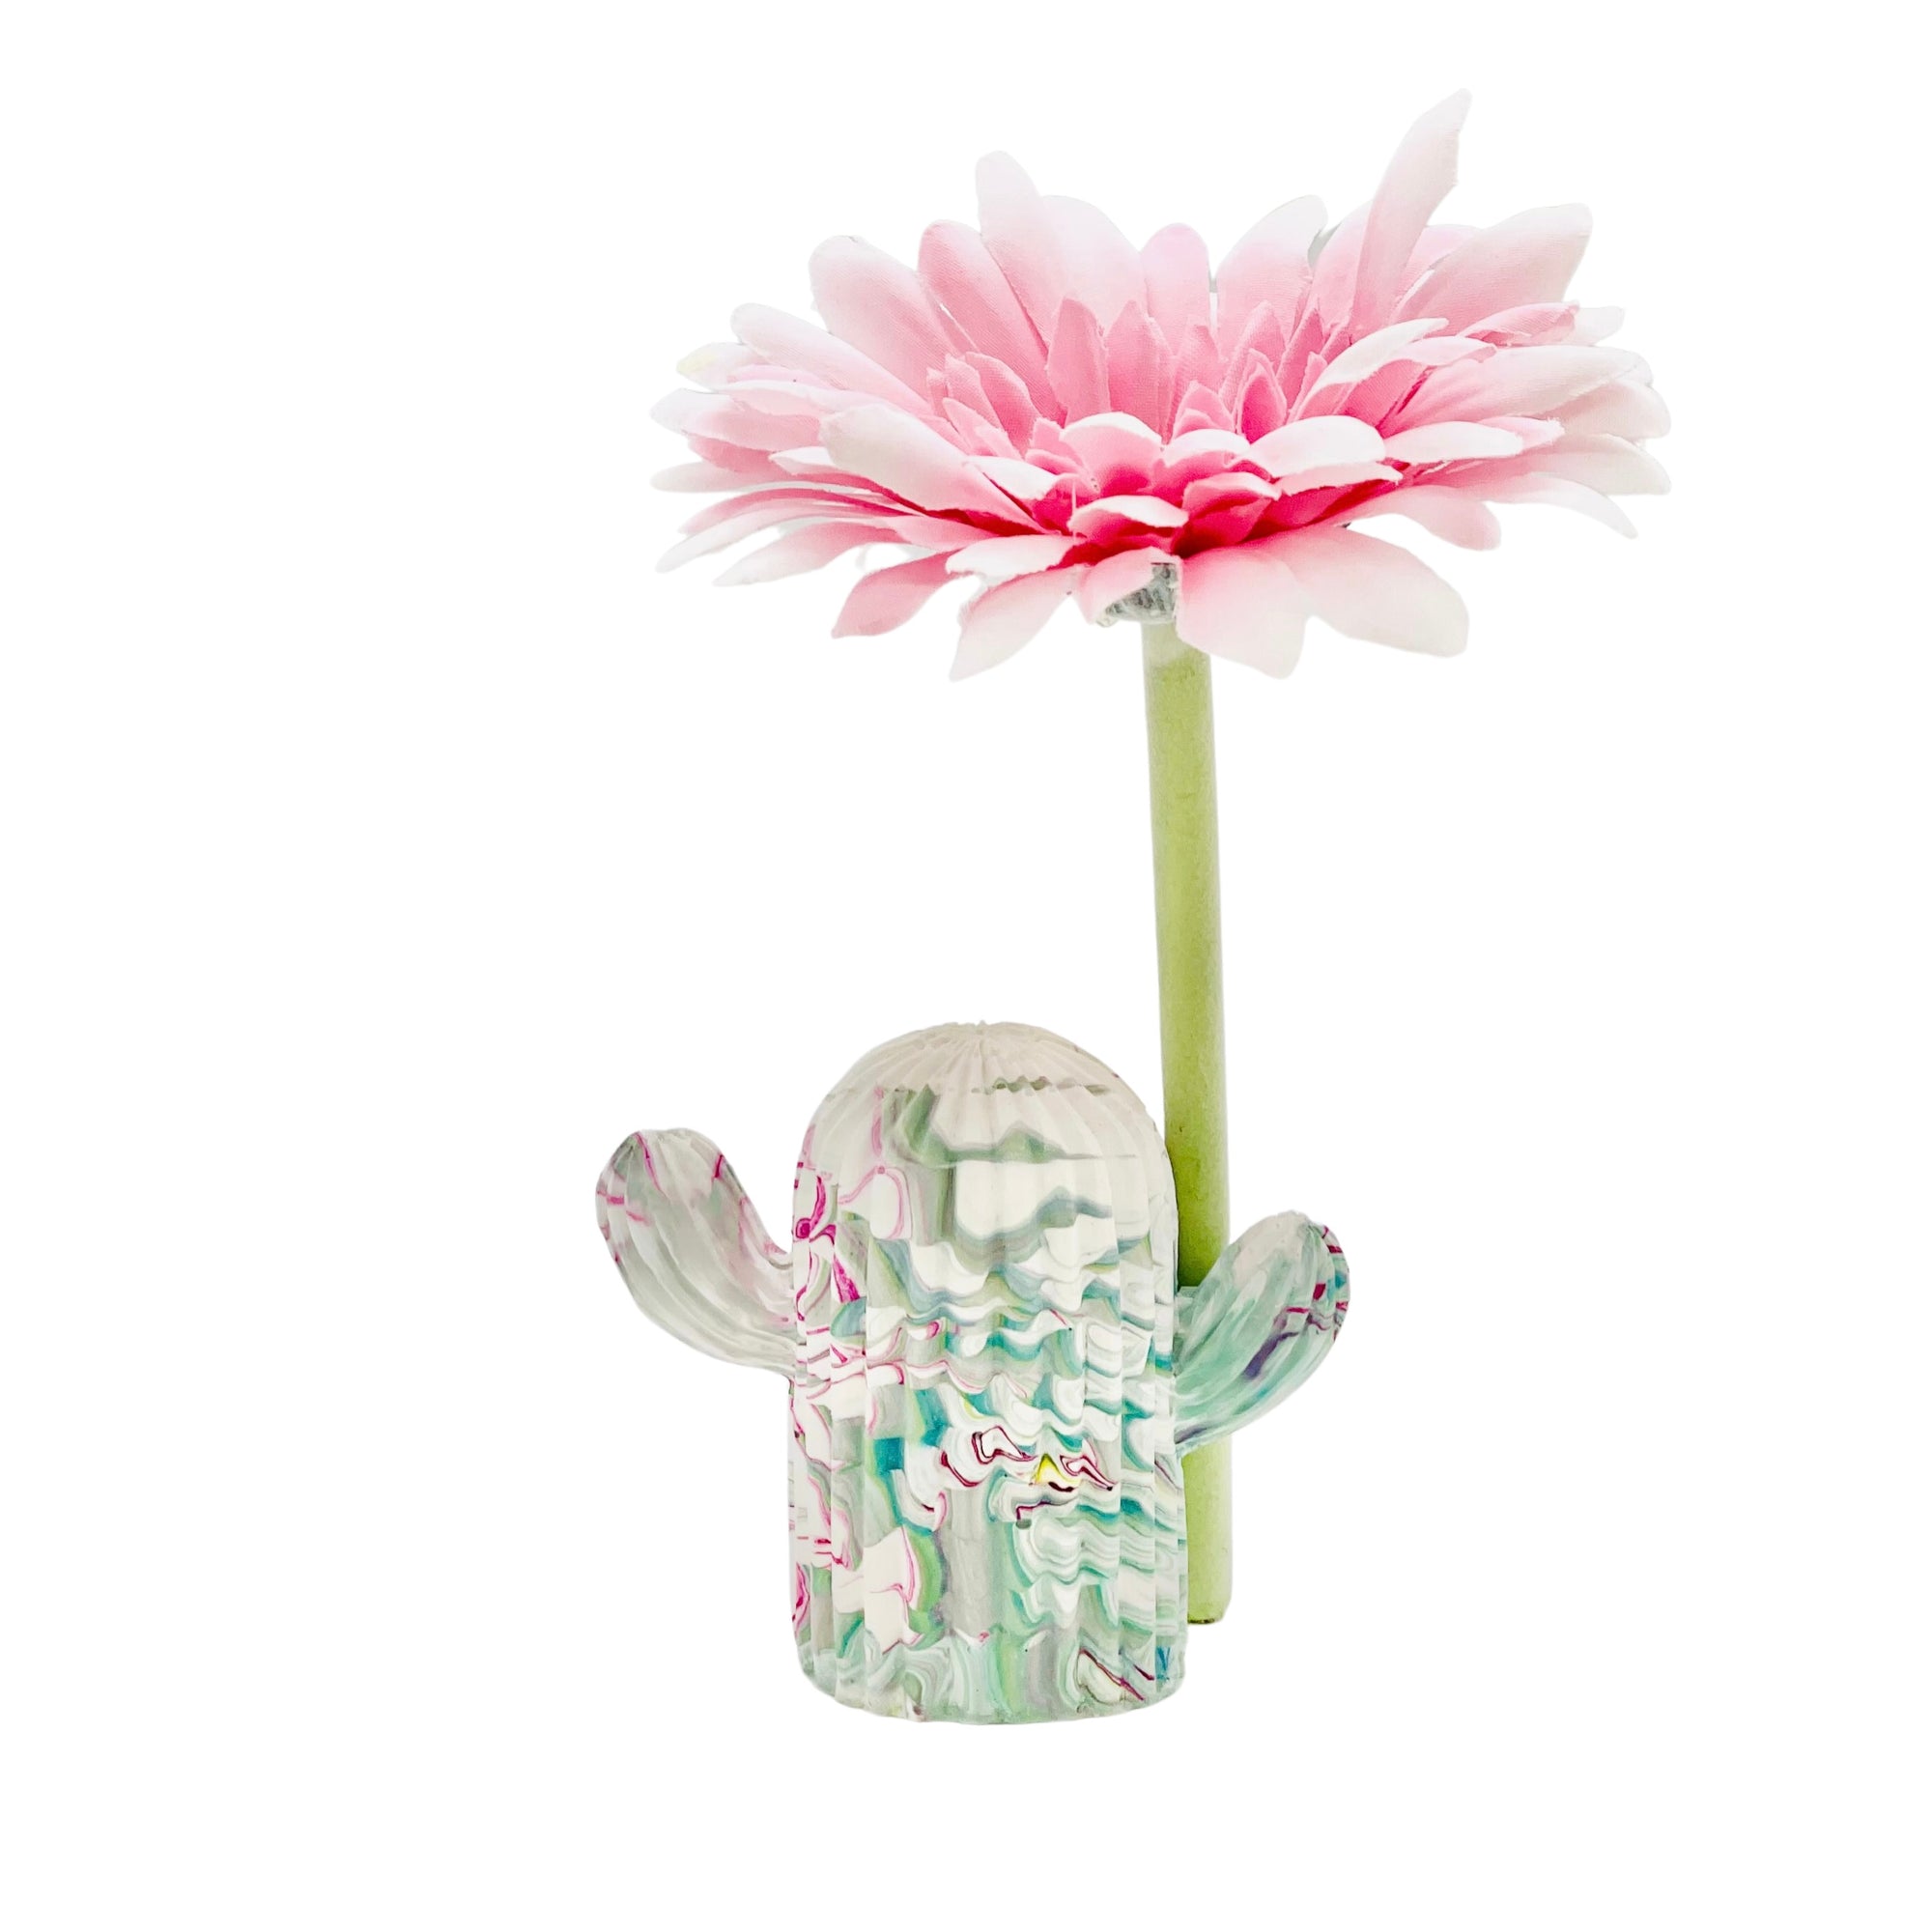 A medium size Jesmonite cactus measuring 7.5cm tall marbled with teal and magenta pigment.